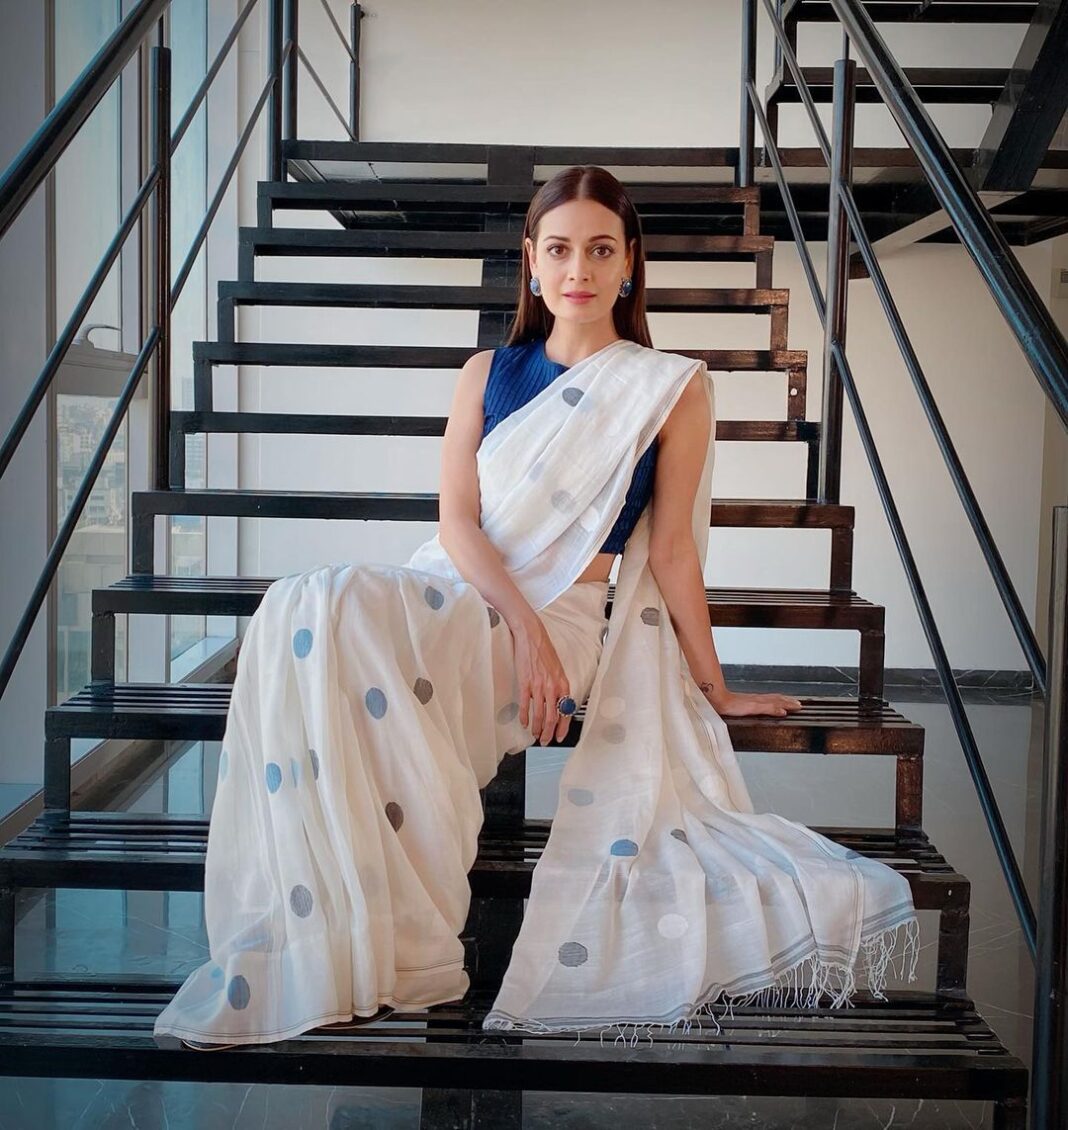 Dia Mirza Instagram - I used to love wearing my Mother’s sarees as a child and play. Mom kept a few sarees for me to wear lest i got to the ‘good’ ones and destroyed them! I’d tie a knot in the first wrap and then fold pleats, wrap the pallo around my waist and play different parts. Some days i’d be a teacher, some days a lawyer, some days a labourer... imagining a classroom full of children, a court case or a construction site. Im told i would be every part as i spent hours alone keeping myself entertained! Much later when i started doing acting workshops I discovered this to be an integral part of workshops! Imagining, creating and responding to imaginary circumstances and people. What FUN! How many of you as children created make believe situations and played different parts? #ActorsLife #LookThePart #Play #DoBeDoBeDo #ThrowBack #Tuesday #VocalForLocal #SareeNotSorry #MakuTextiles Outfit courtesy : @makutextiles Jewelry courtesy : @hyperbole_accessories Hair and makeup by : @shraddhamishra8 Styled by : @theiateckchandaney Managed by : @jainisha_shah @exceedentertainemnt Photos : @manojstillwala Bandra World of Storytellers